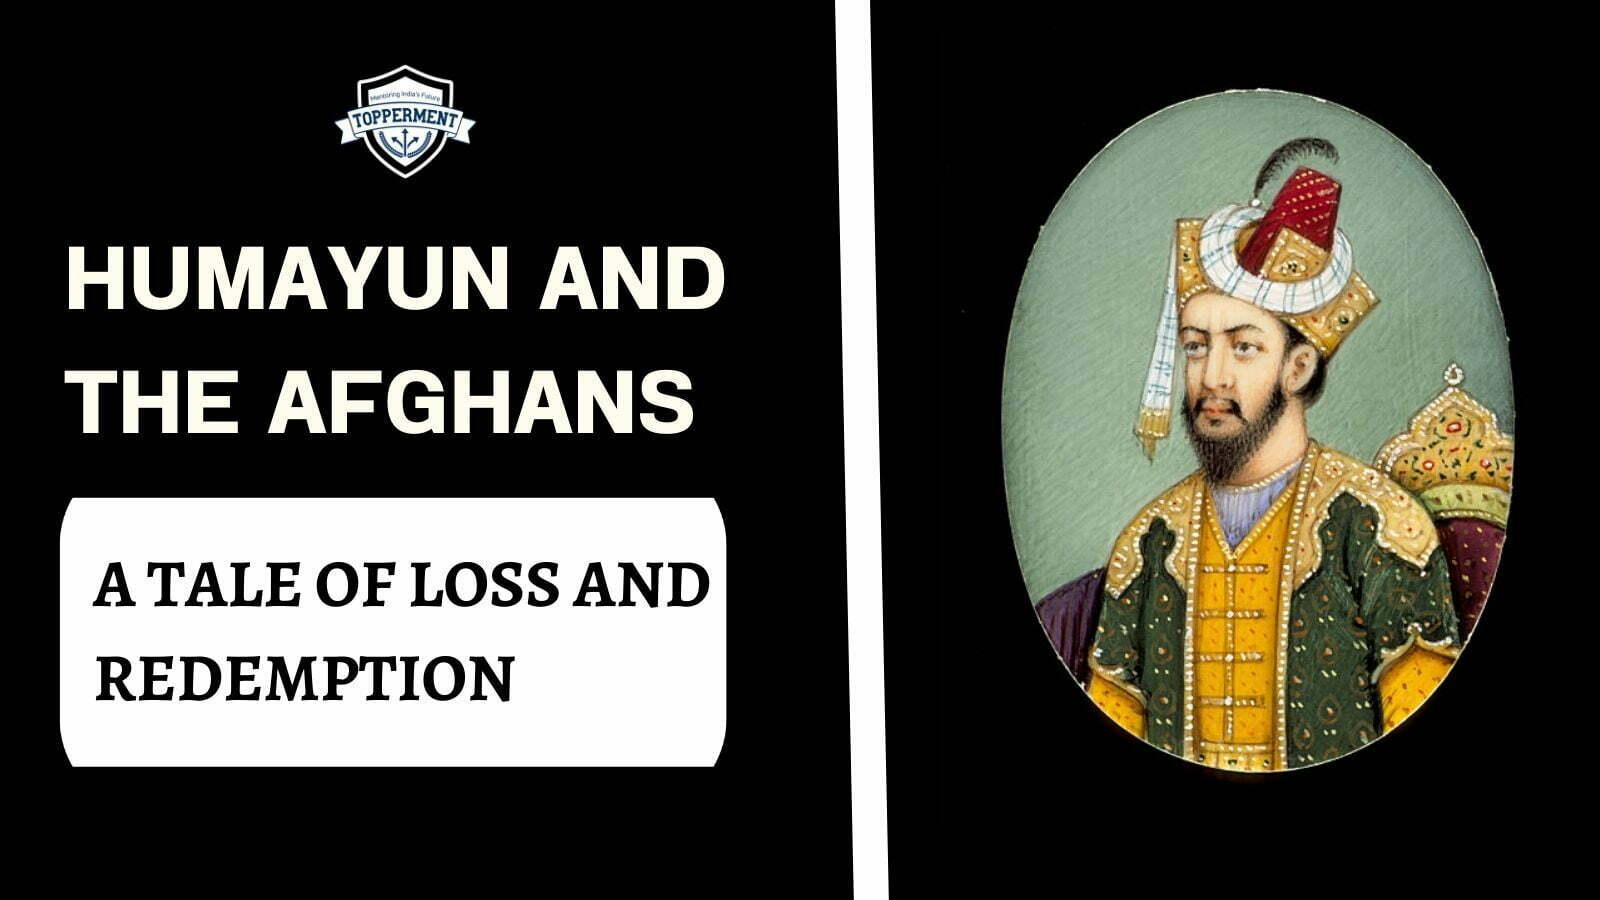 Humayun and The Afghans: A Tale Of Loss and Redemption-TopperMent